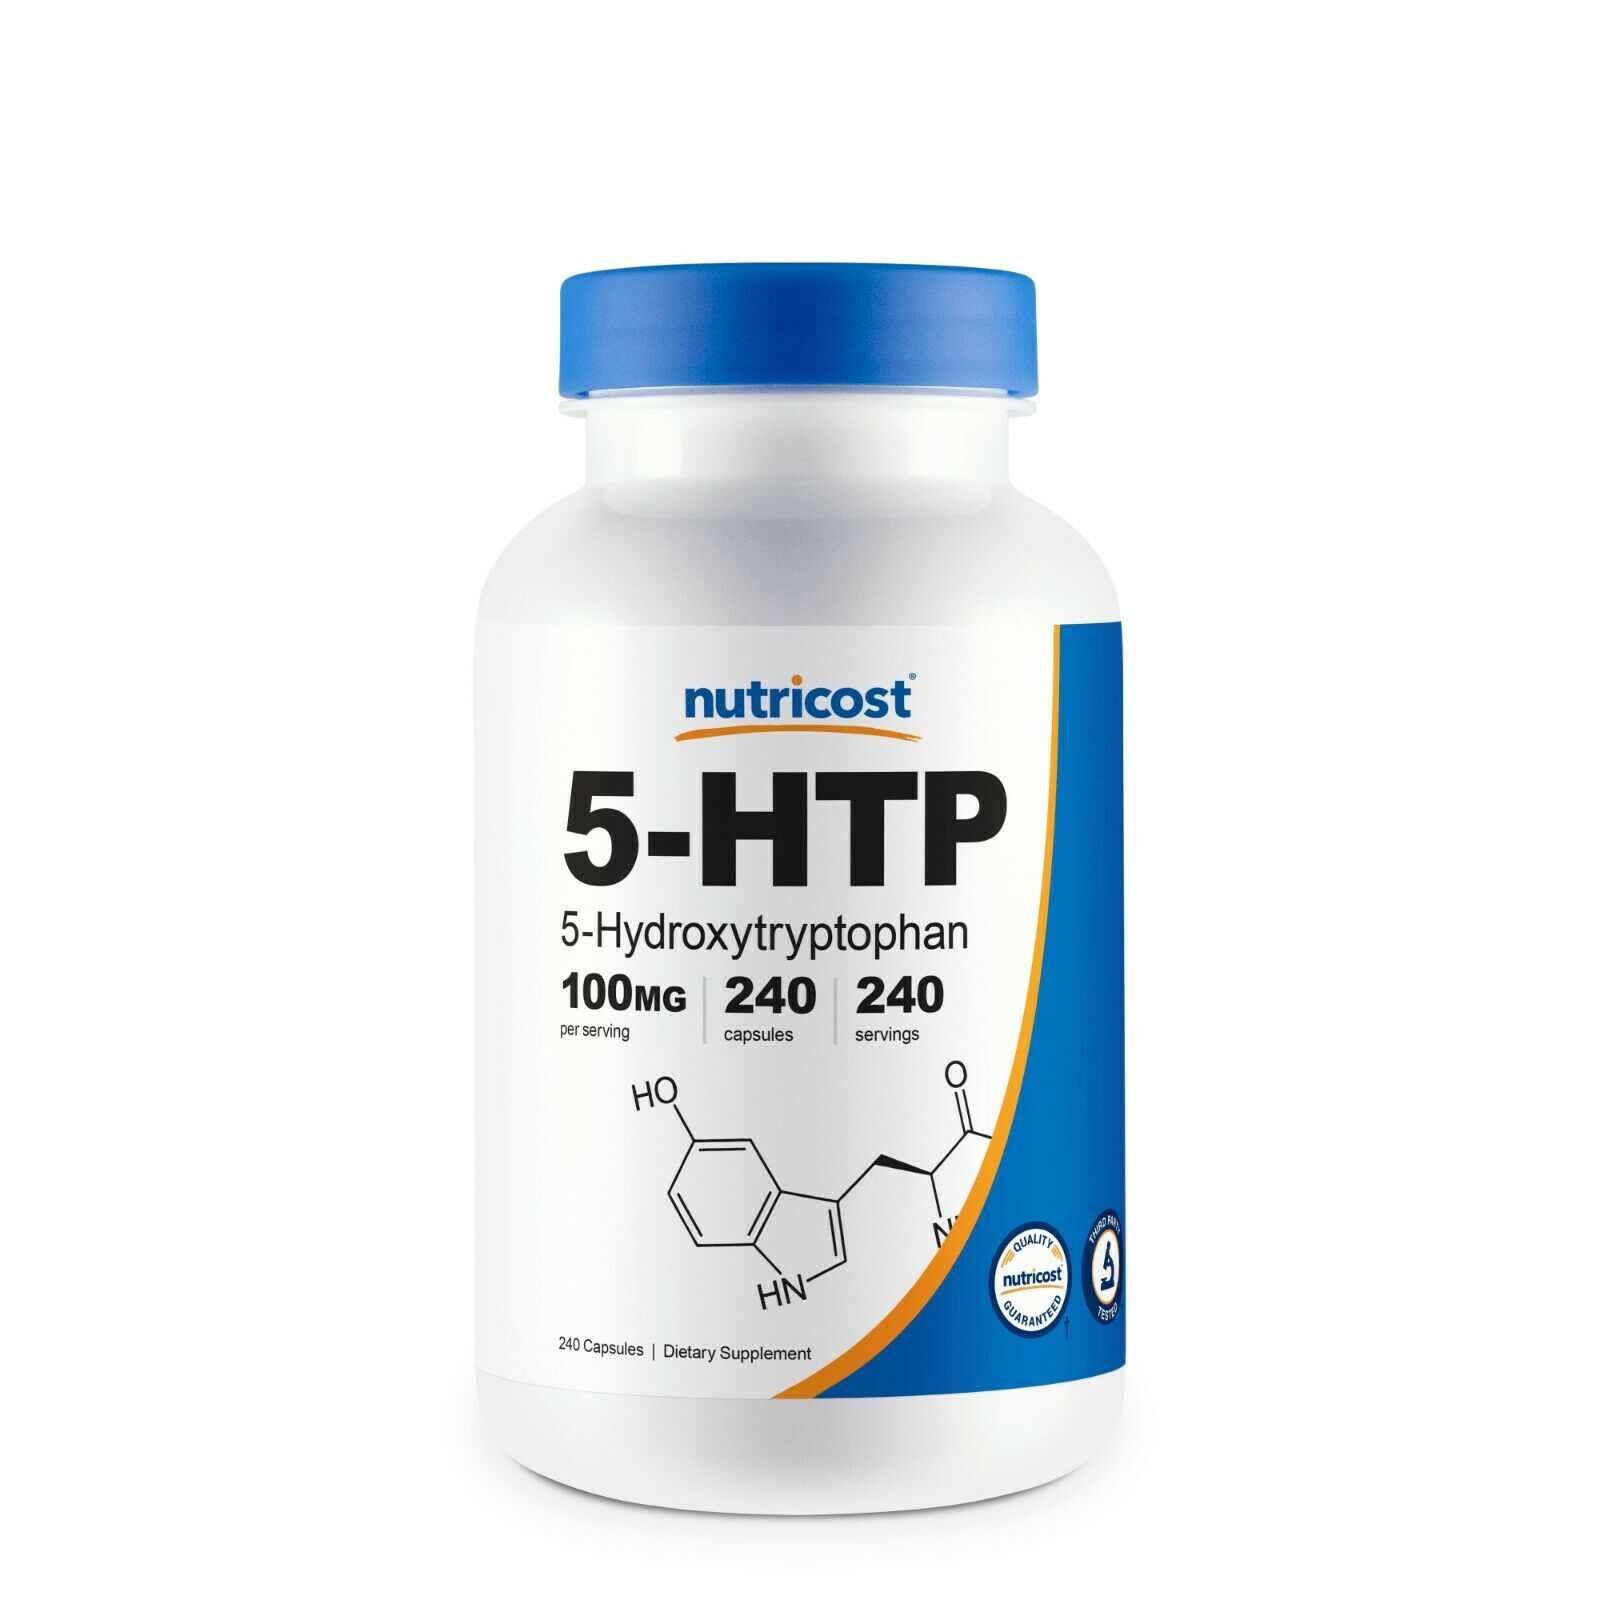 Nutricost 5-htp 100mg, 240 Capsules (5-hydroxytryptophan) - Gluten Free, Non-gmo